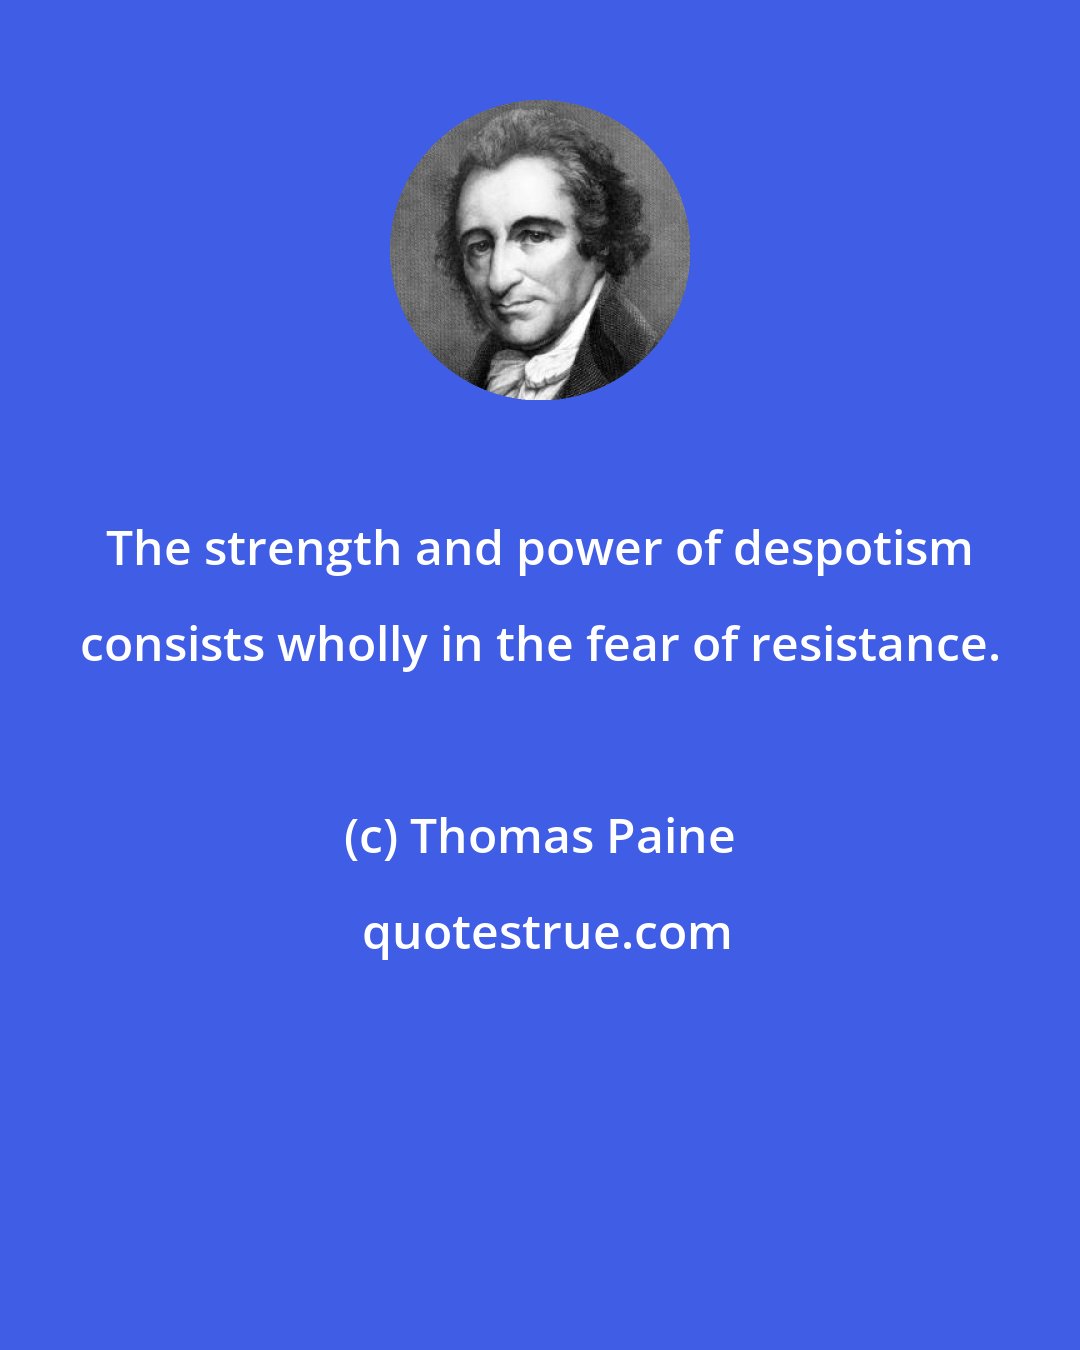 Thomas Paine: The strength and power of despotism consists wholly in the fear of resistance.